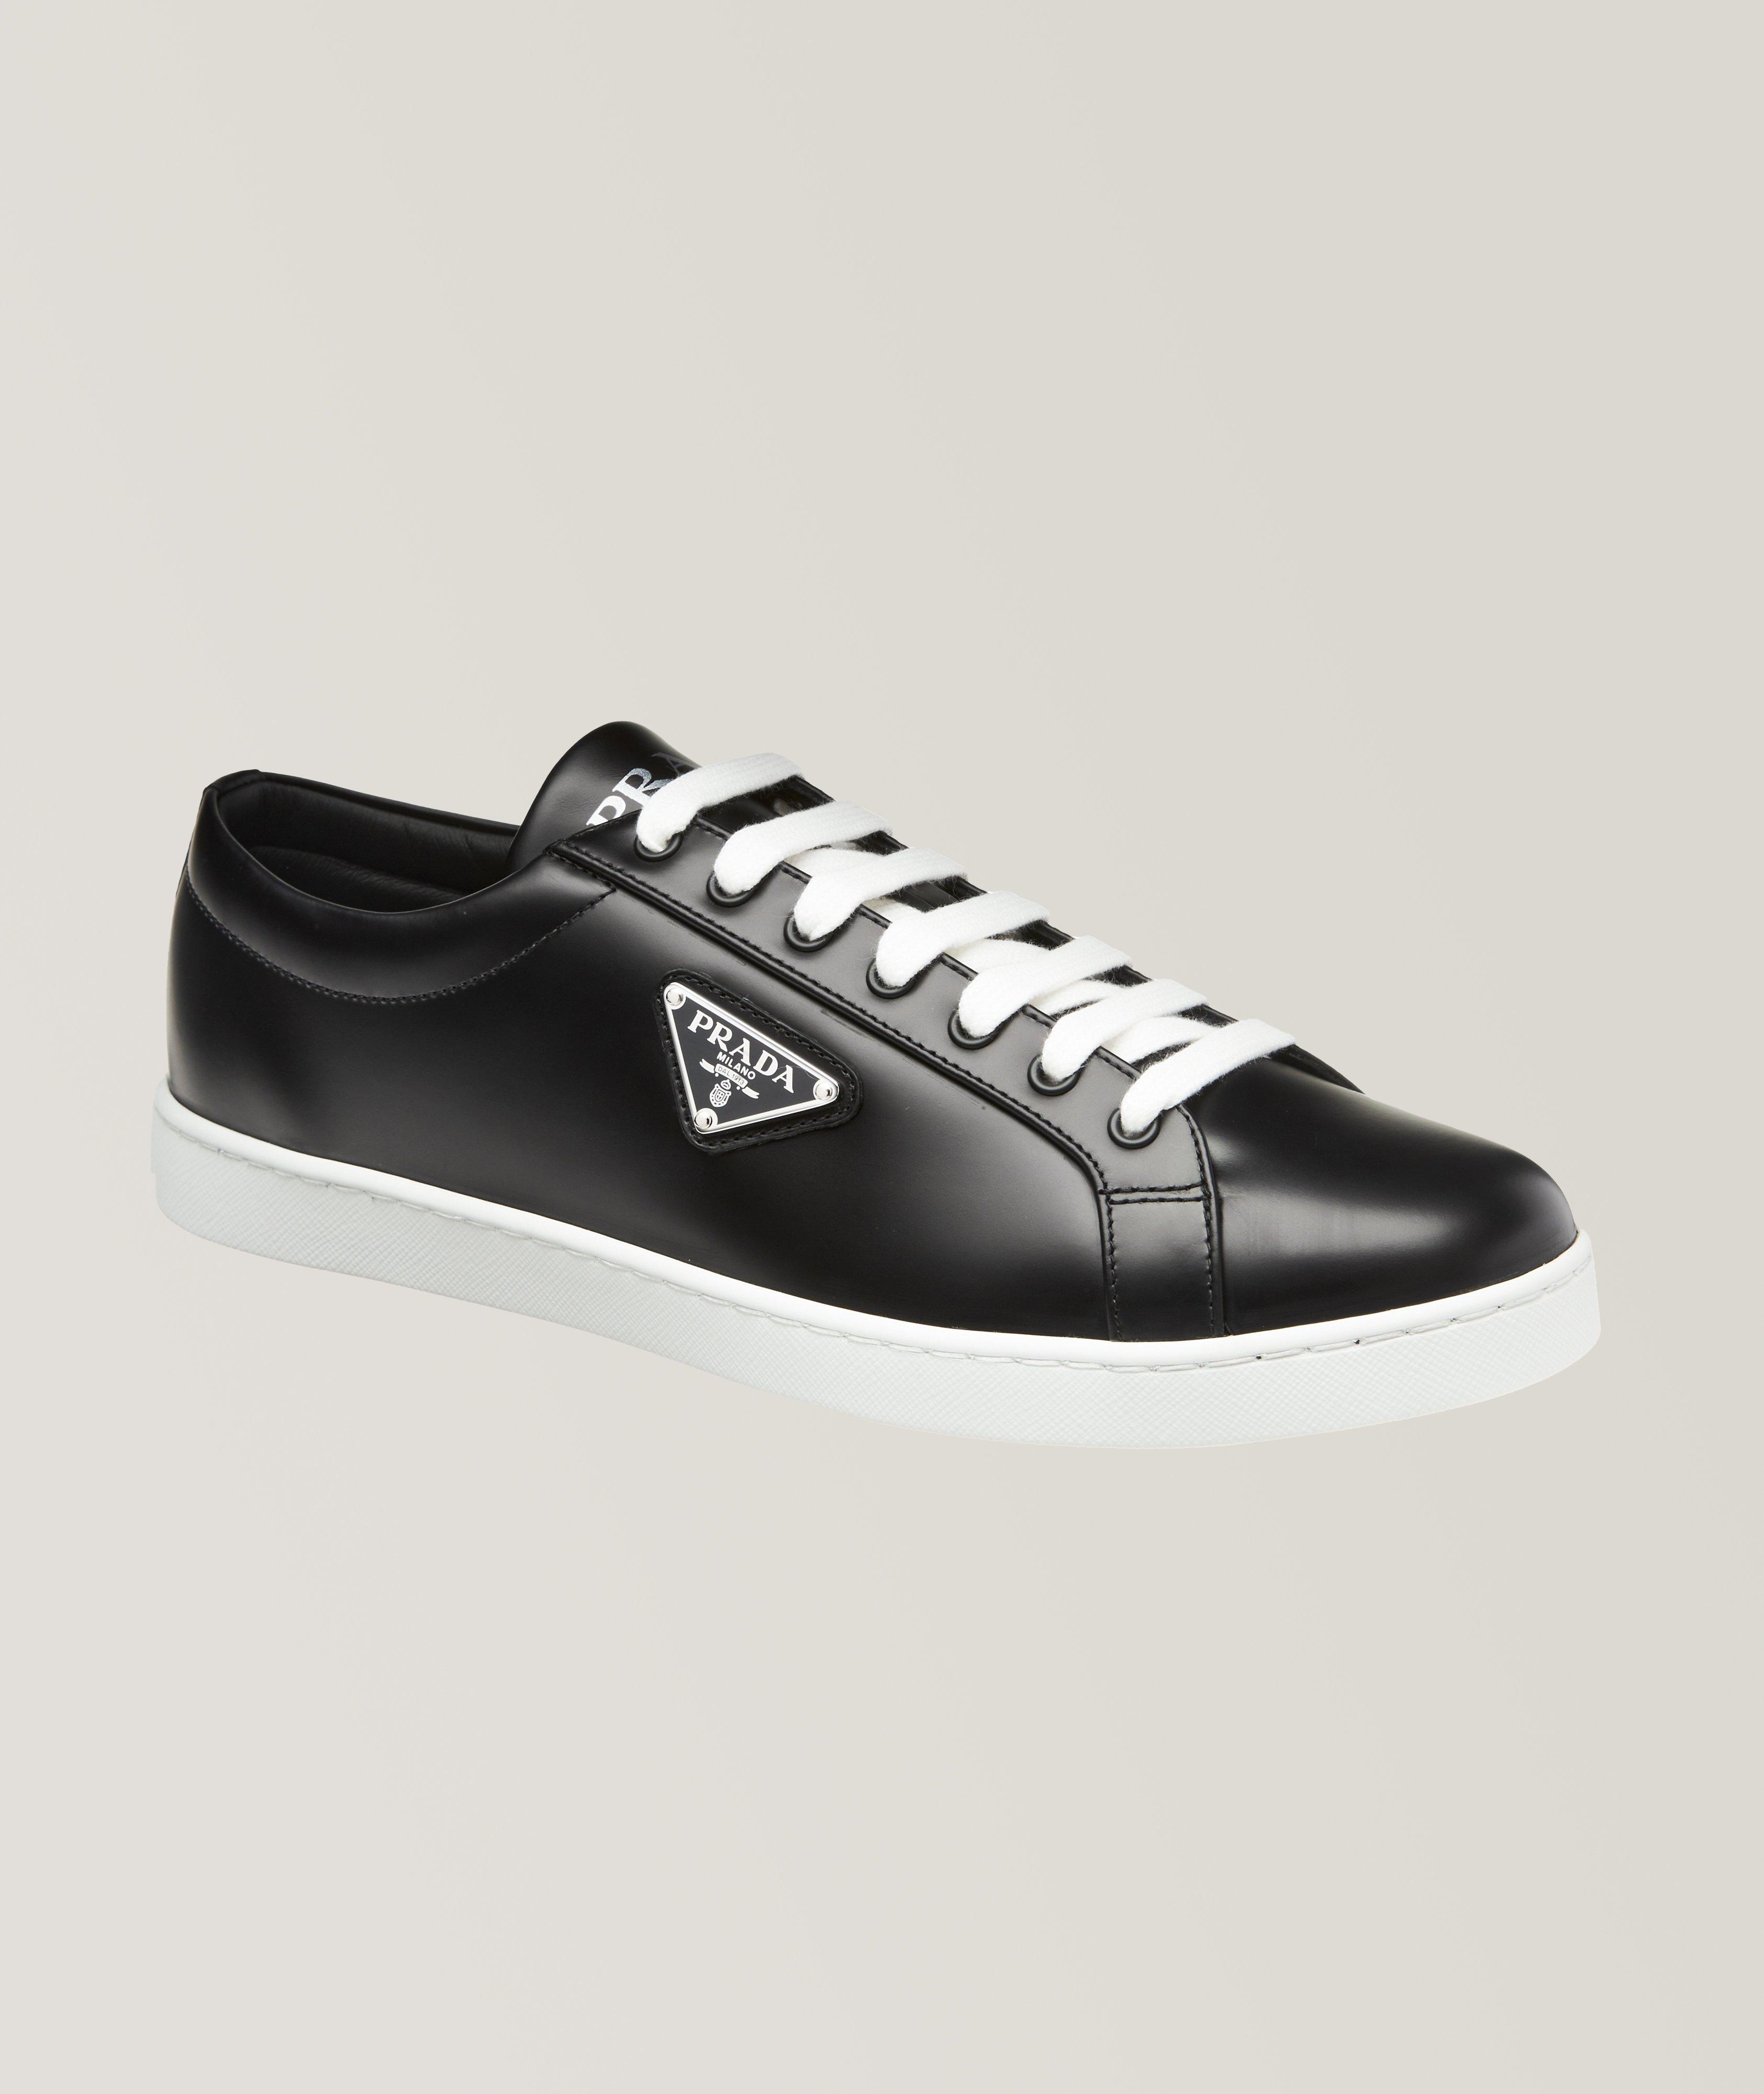 Leather Lane Sneakers image 0